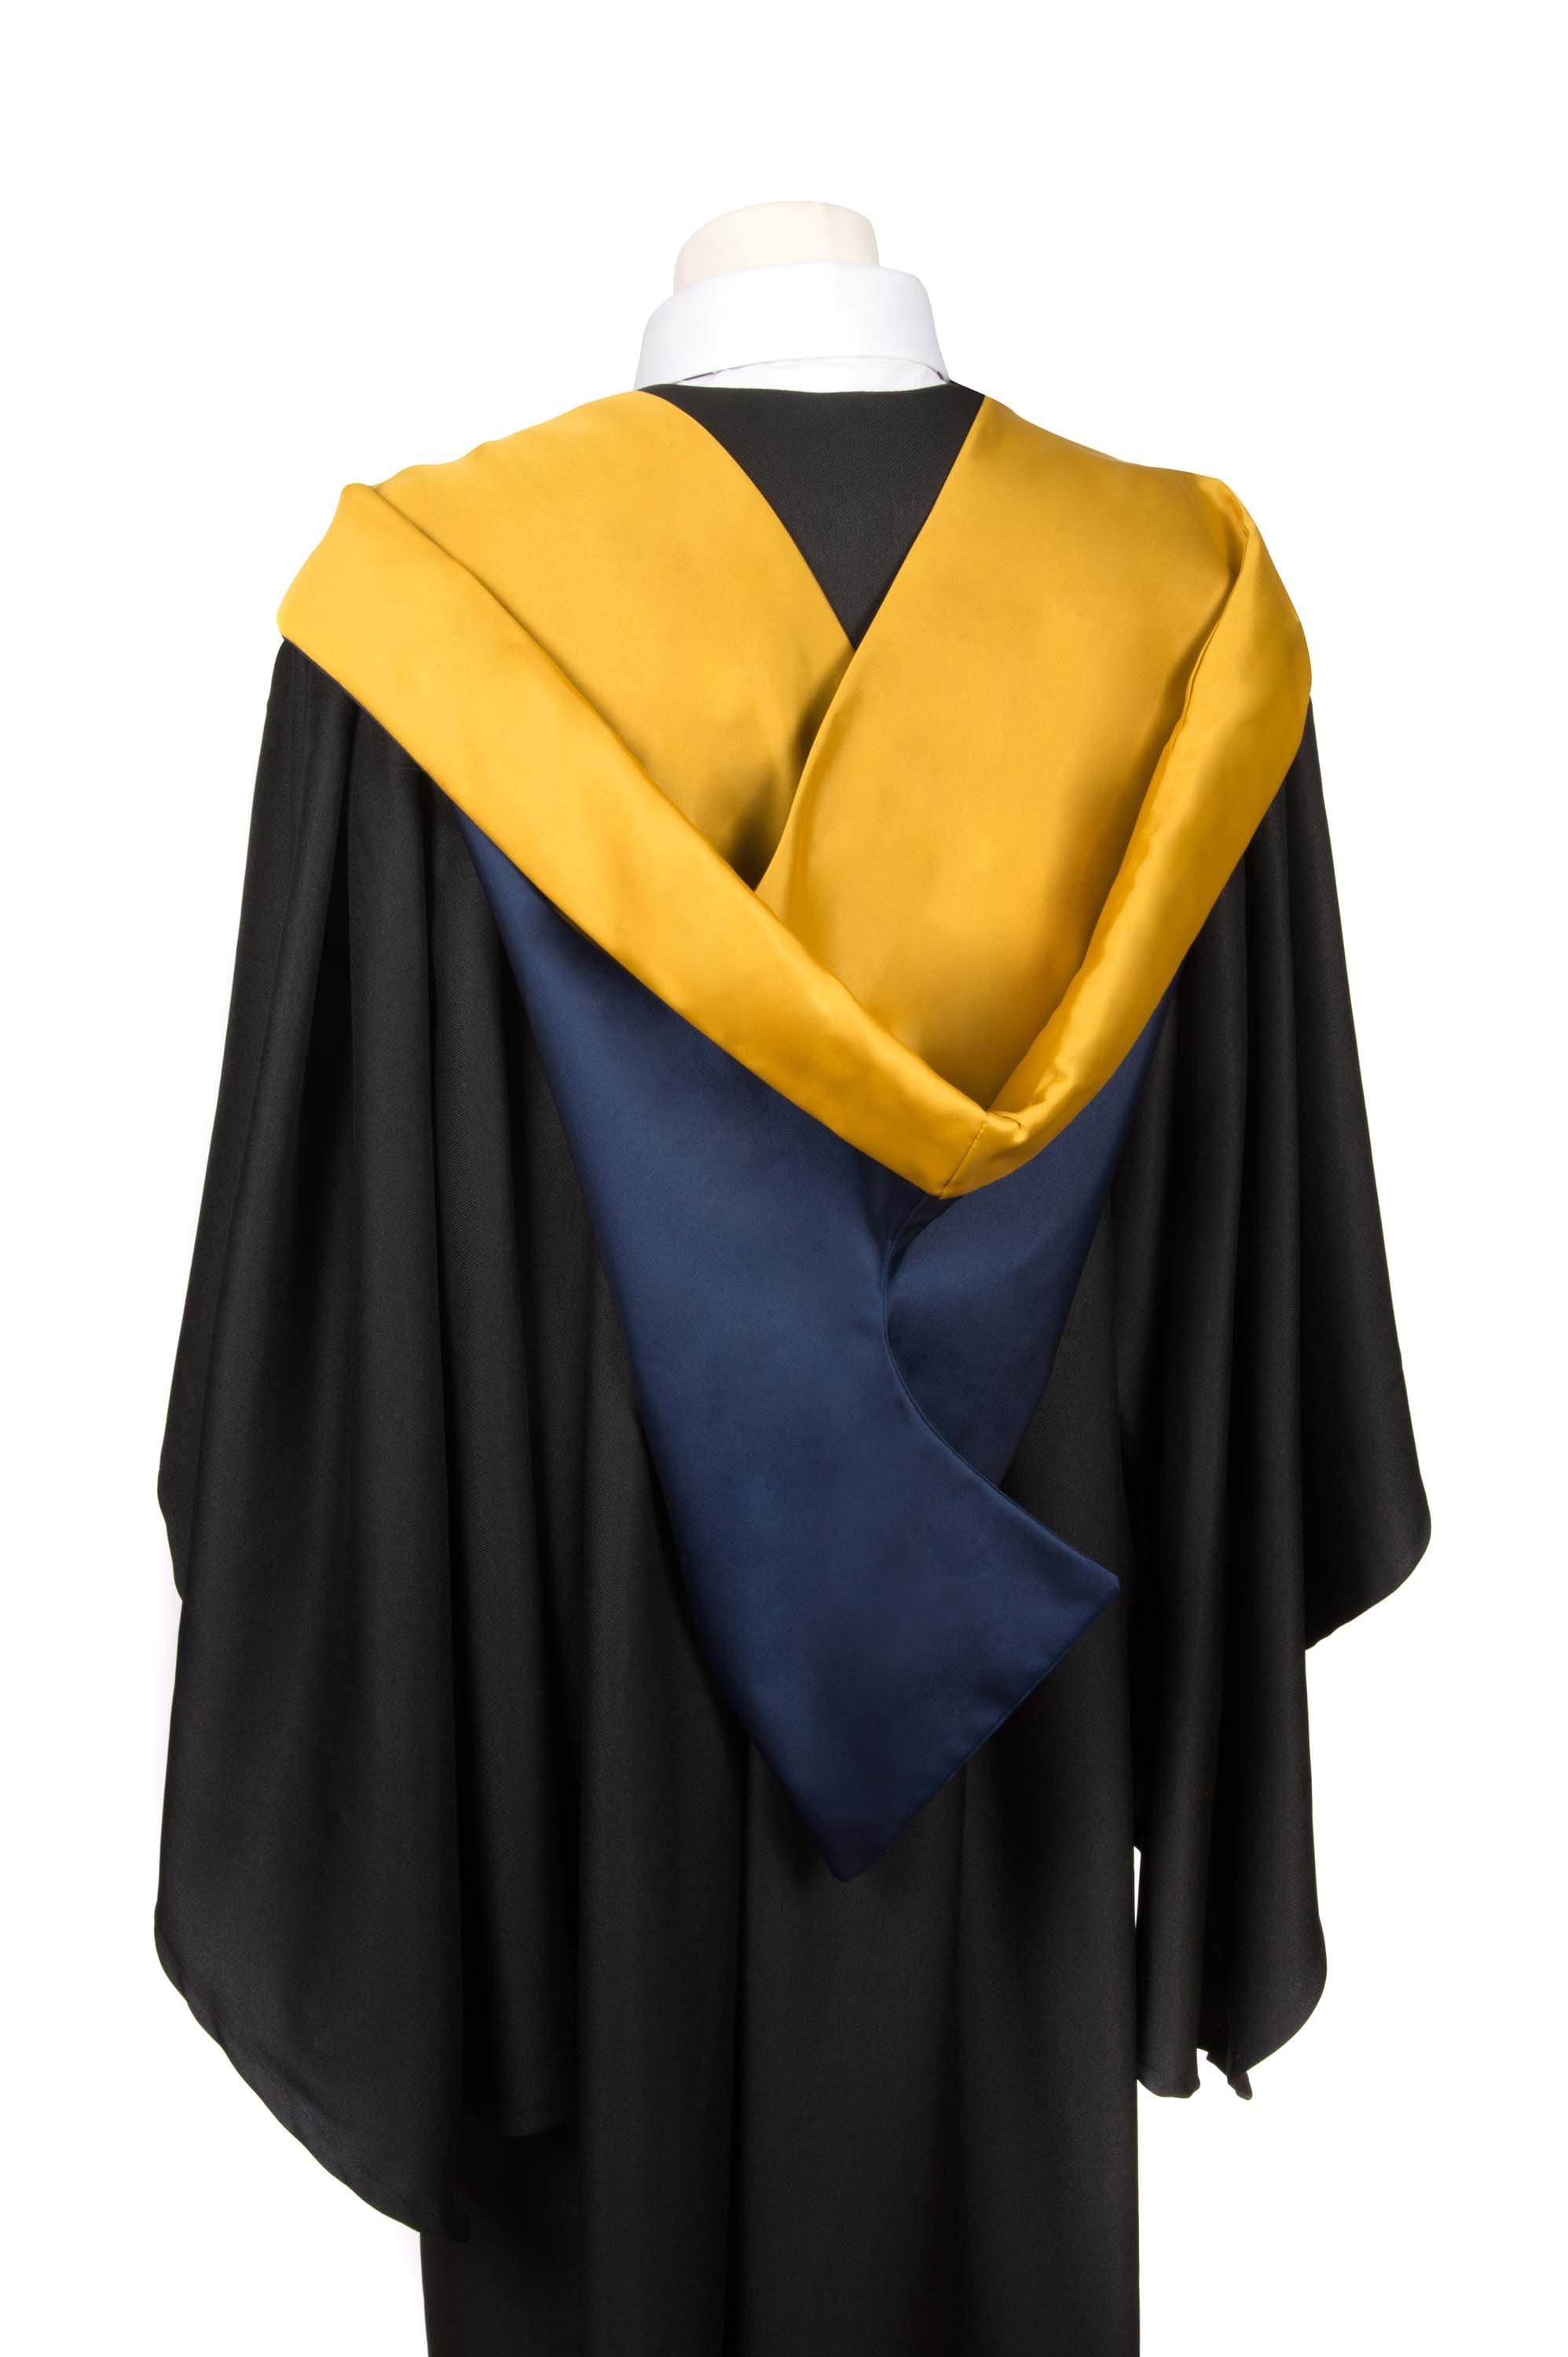 colour_HNC – Navy and Gold